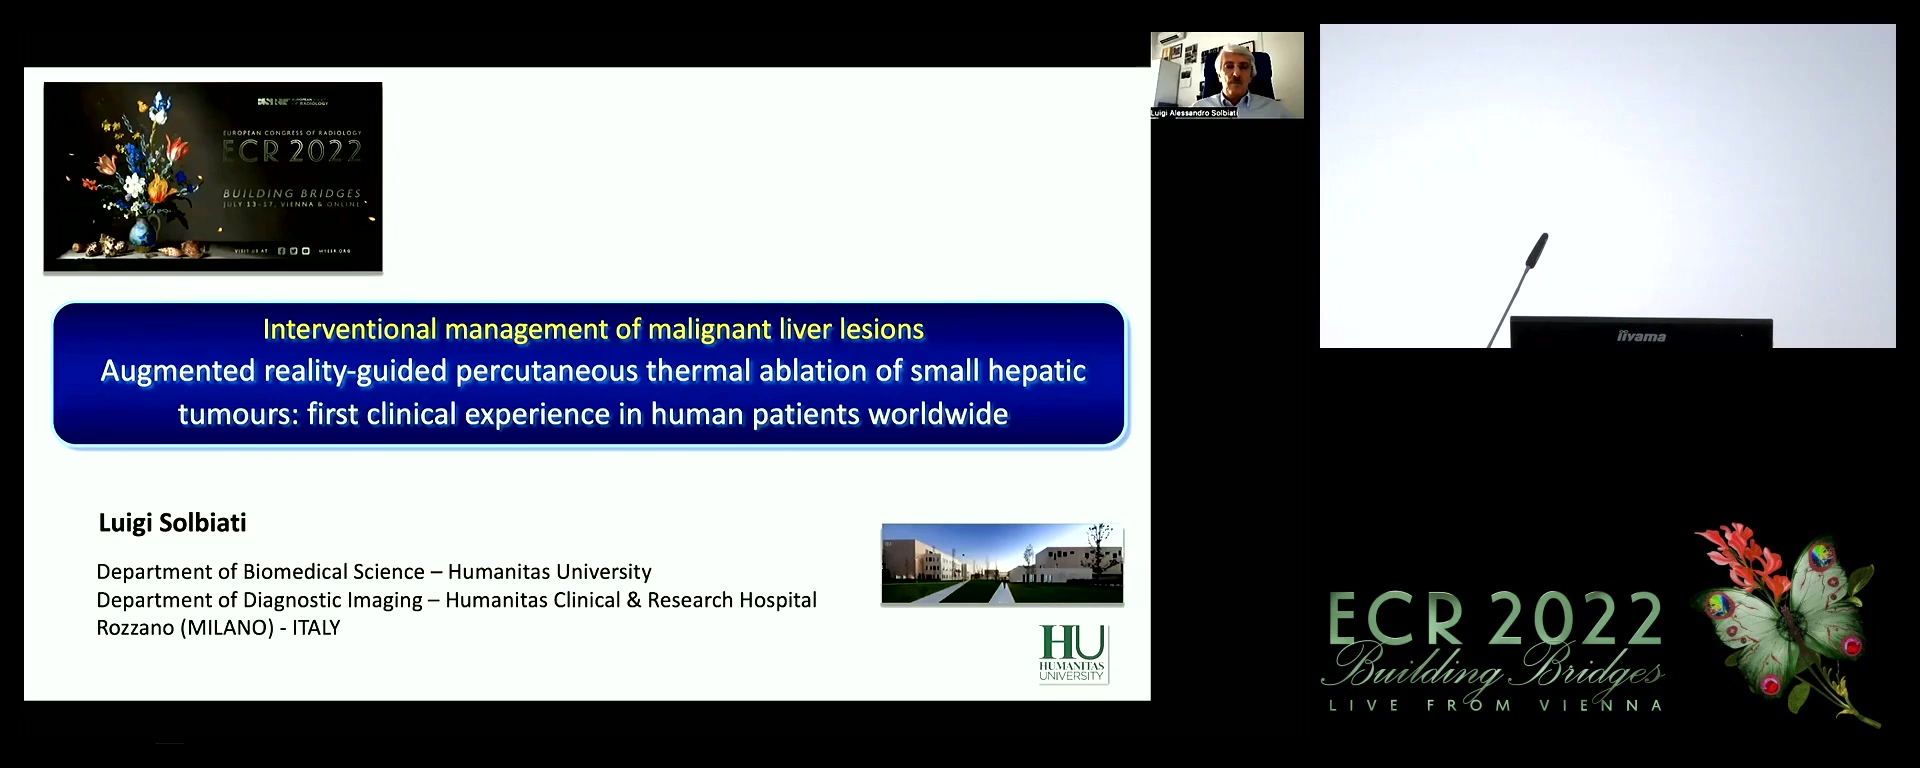 Augmented reality-guided percutaneous thermal ablation of small hepatic tumours: first clinical experience in human patients worldwide - Luigi Solbiati, Rozzano (Milano) / IT